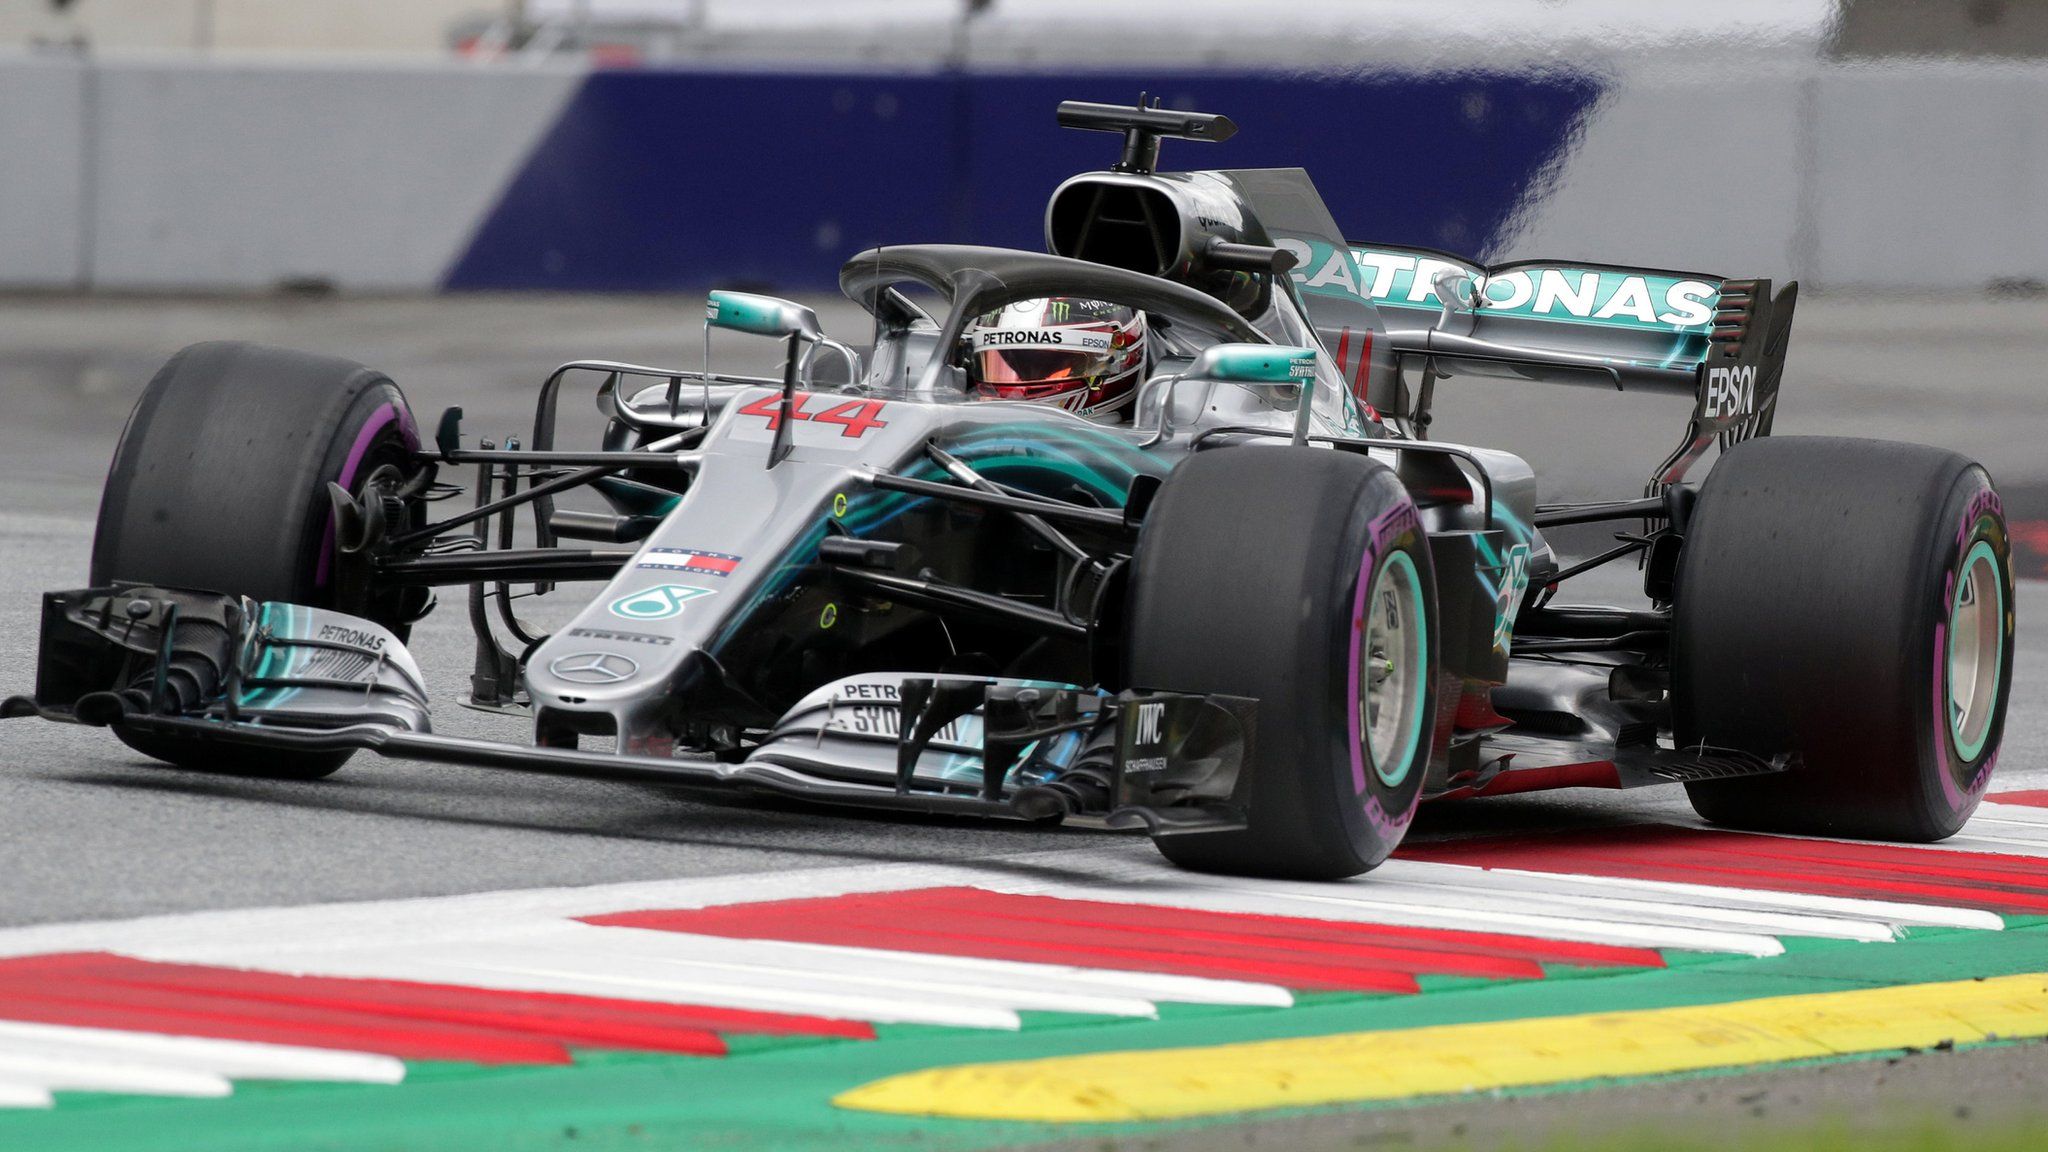 Lewis Hamilton in action at the Austrian Grand Prix